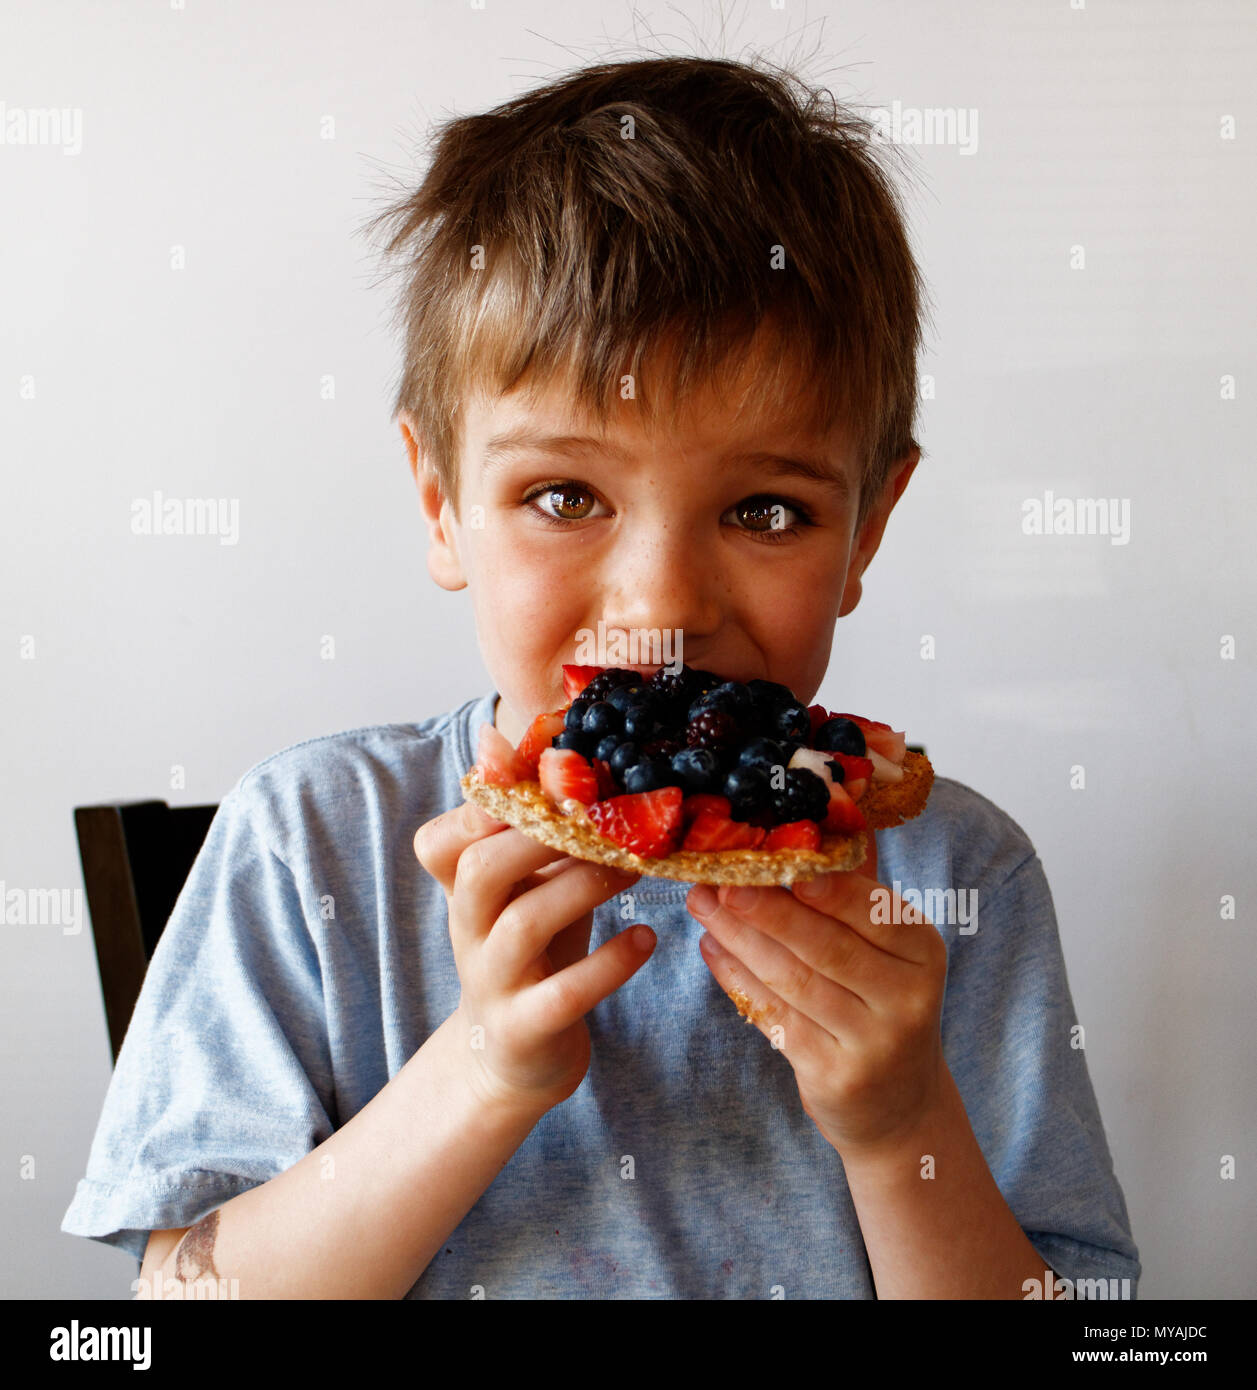 A portrait of a young boy (6 yr old) eating a healthy breakfast of fruit and toast Stock Photo